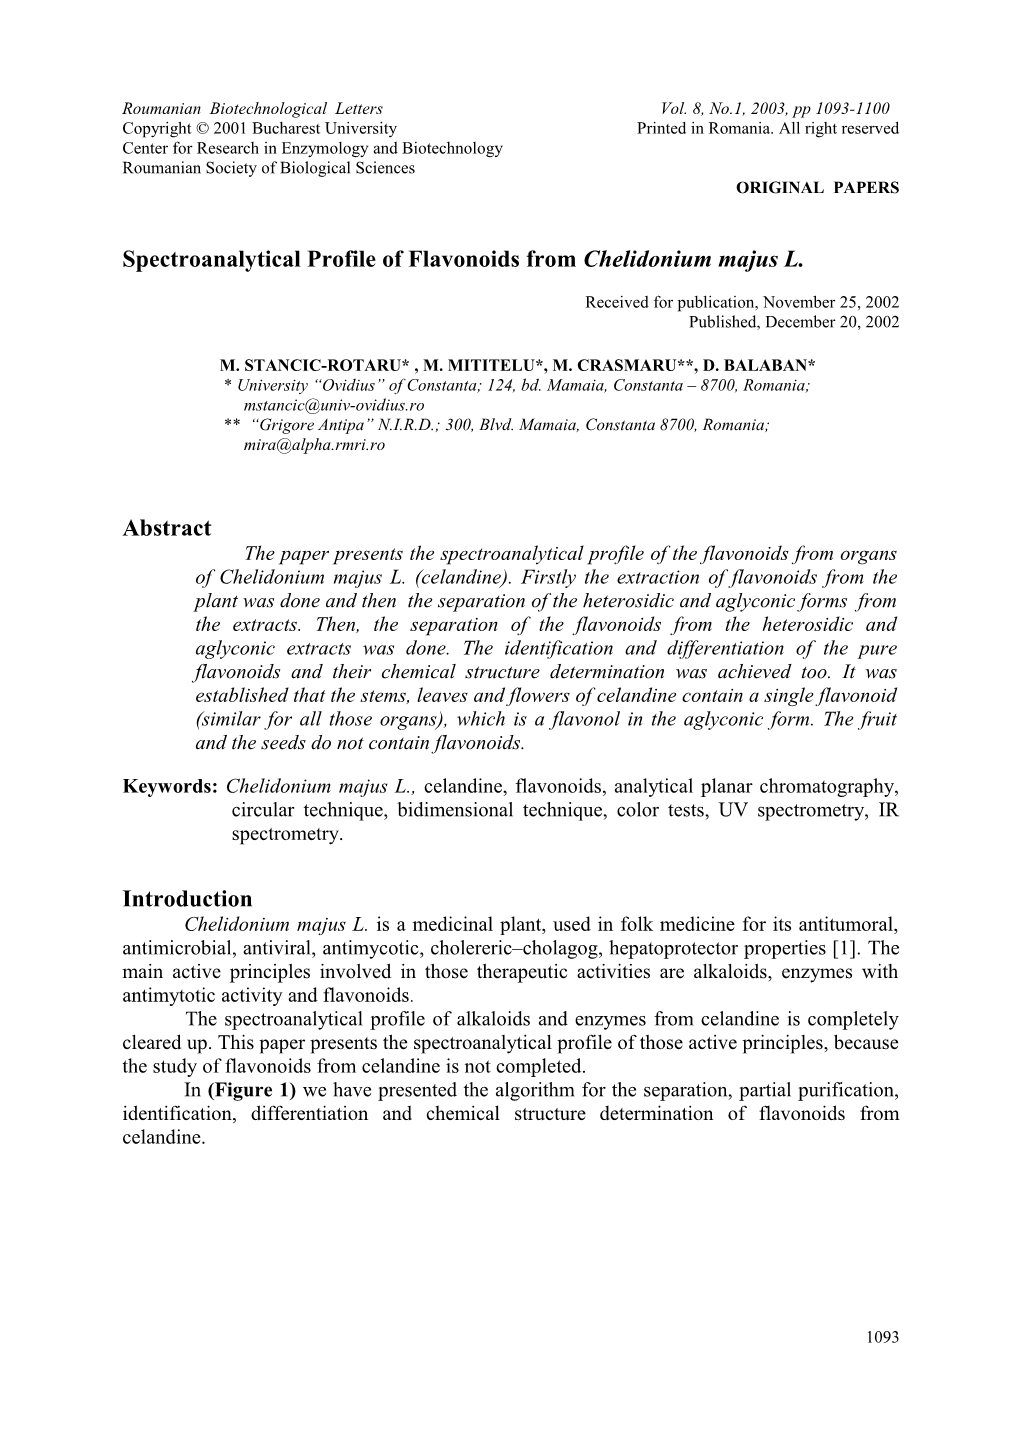 The Complete Analytical Profile of Flavonoids from Celandine